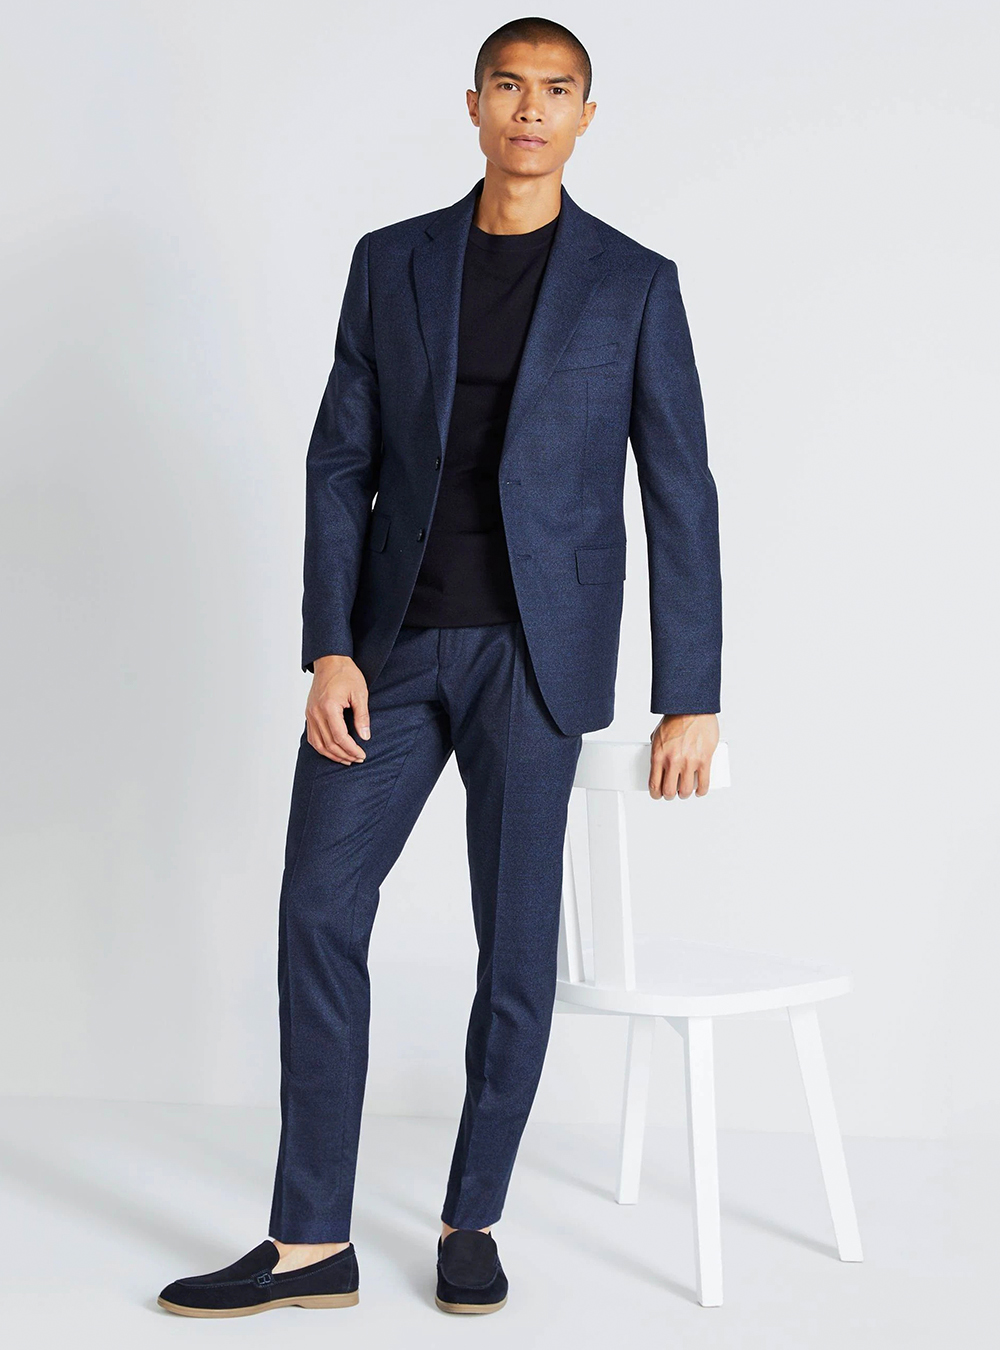 Navy blue suit, black crew neck t-shirt and black suede loafers